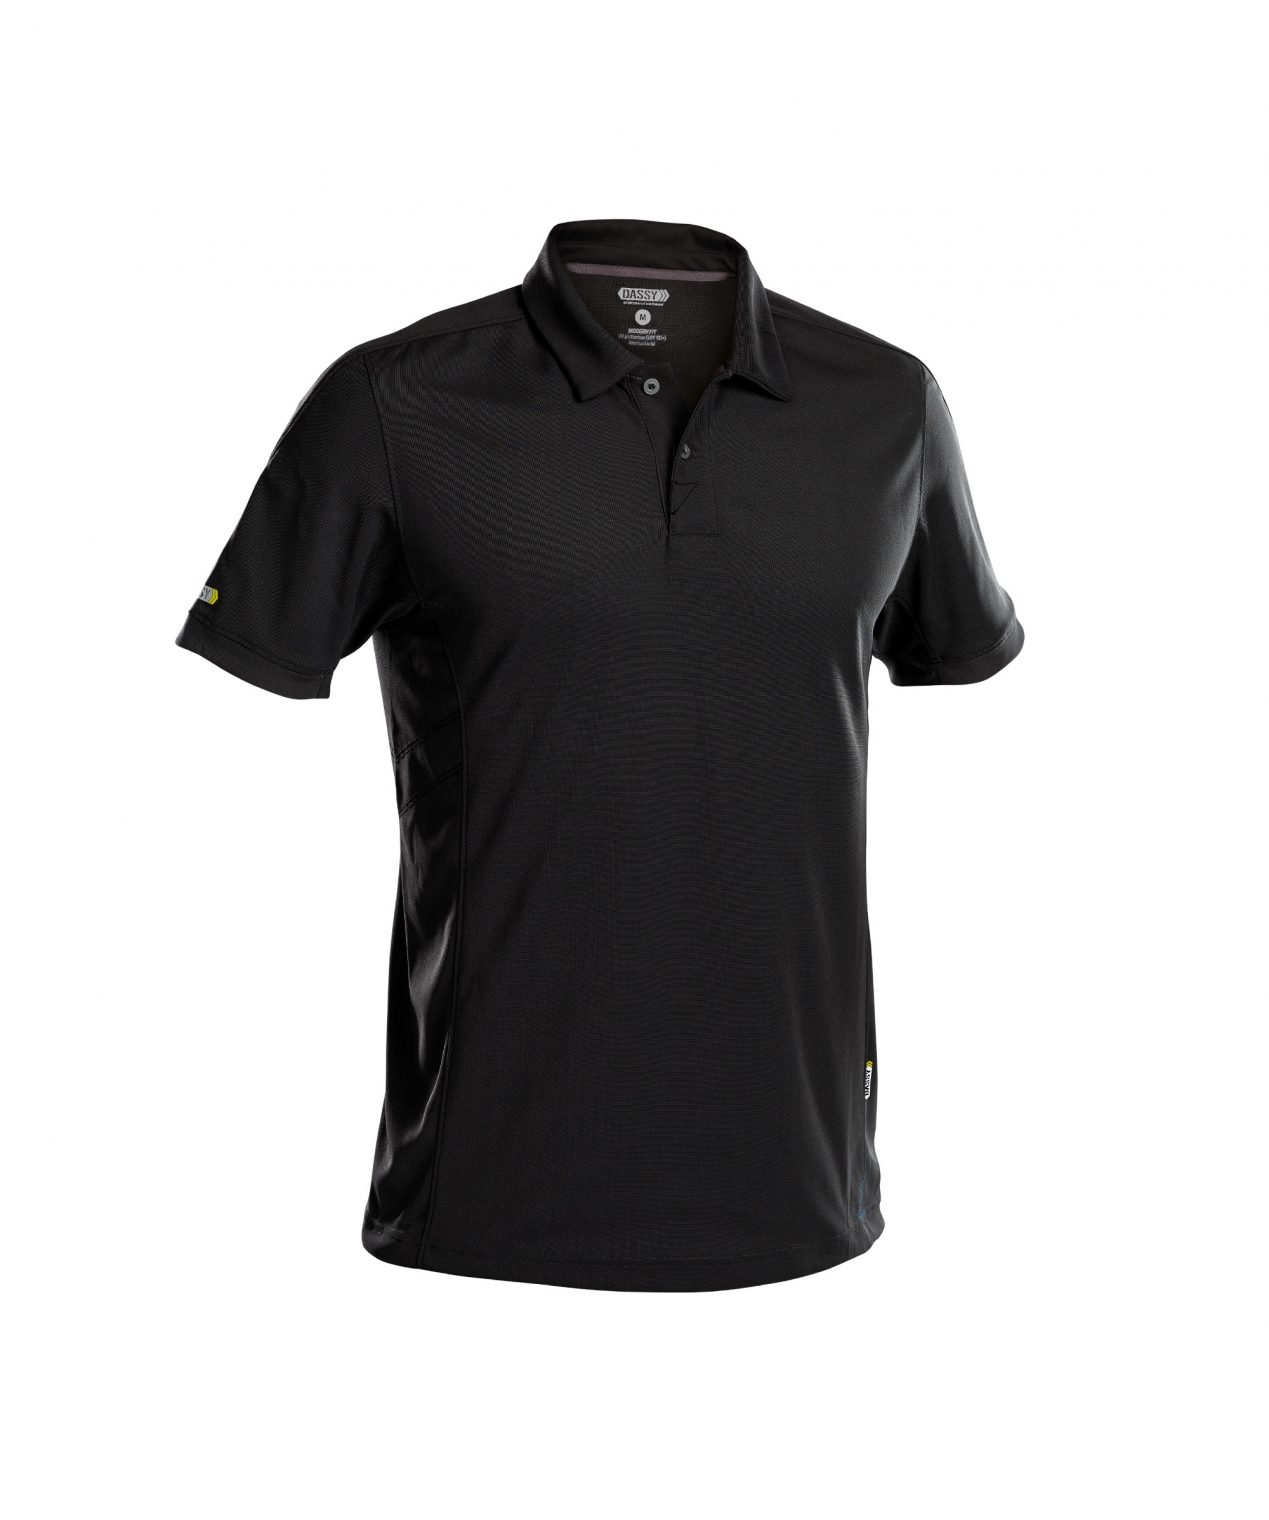 traxion polo shirt black front